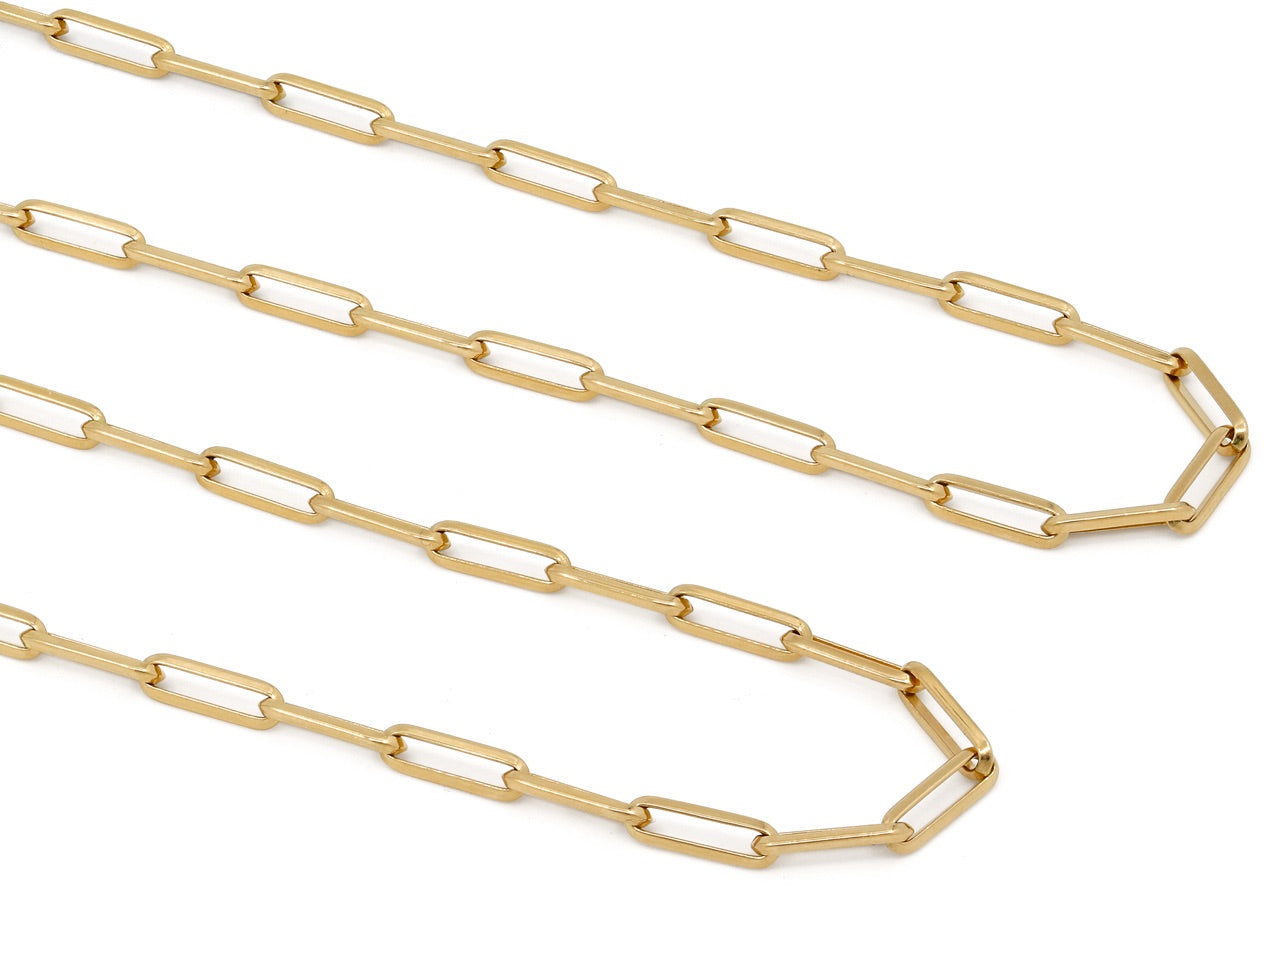 Italian Gold Chain Necklace, by Beladora